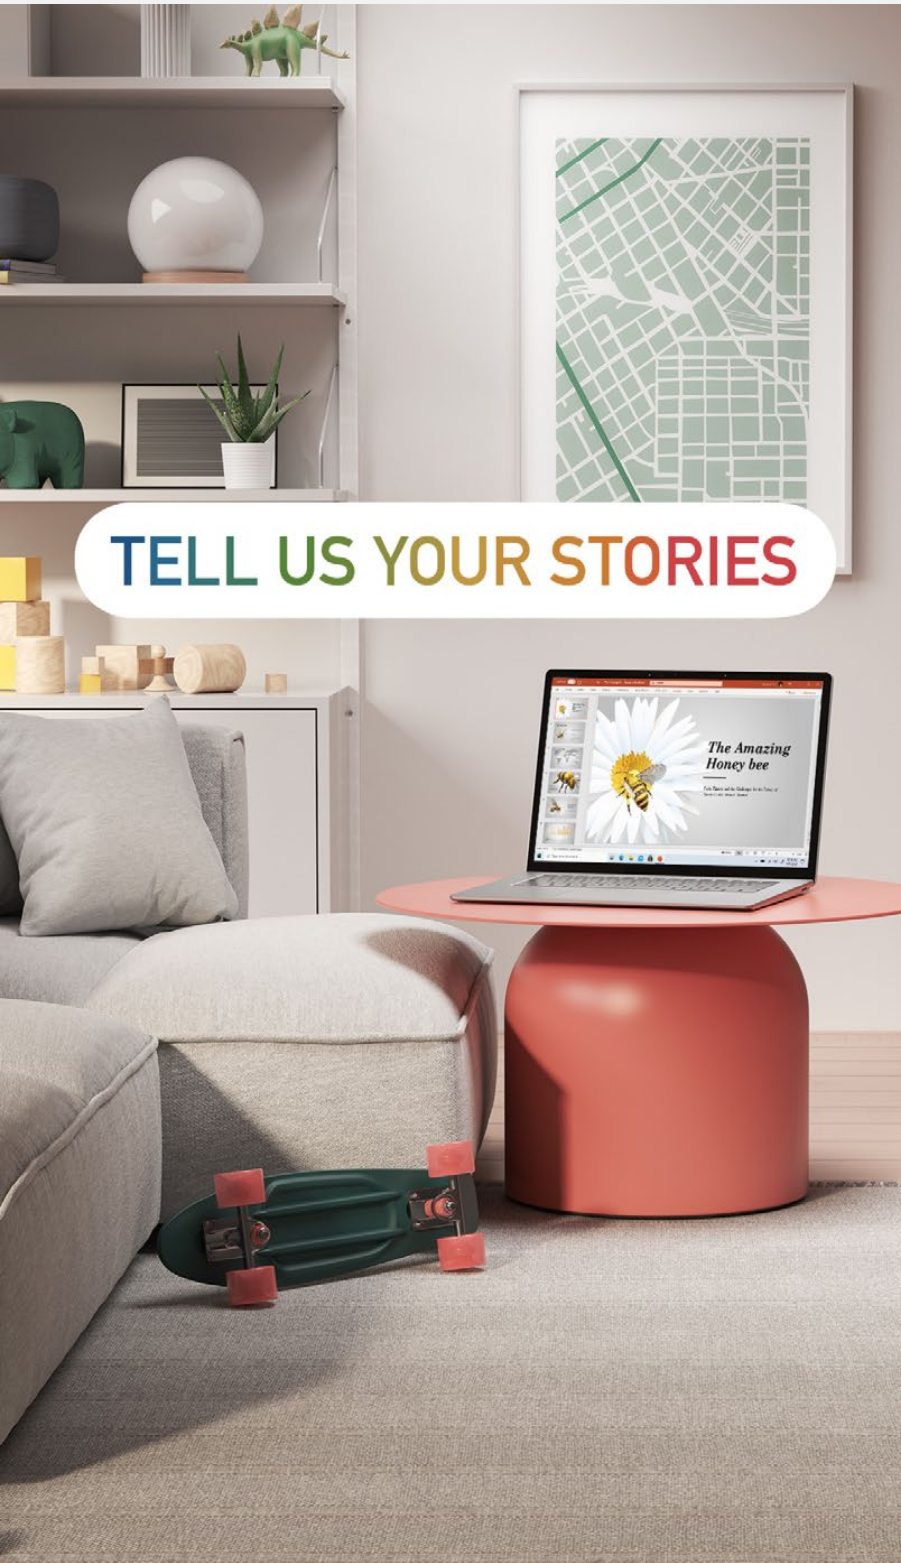 Tell us your stories